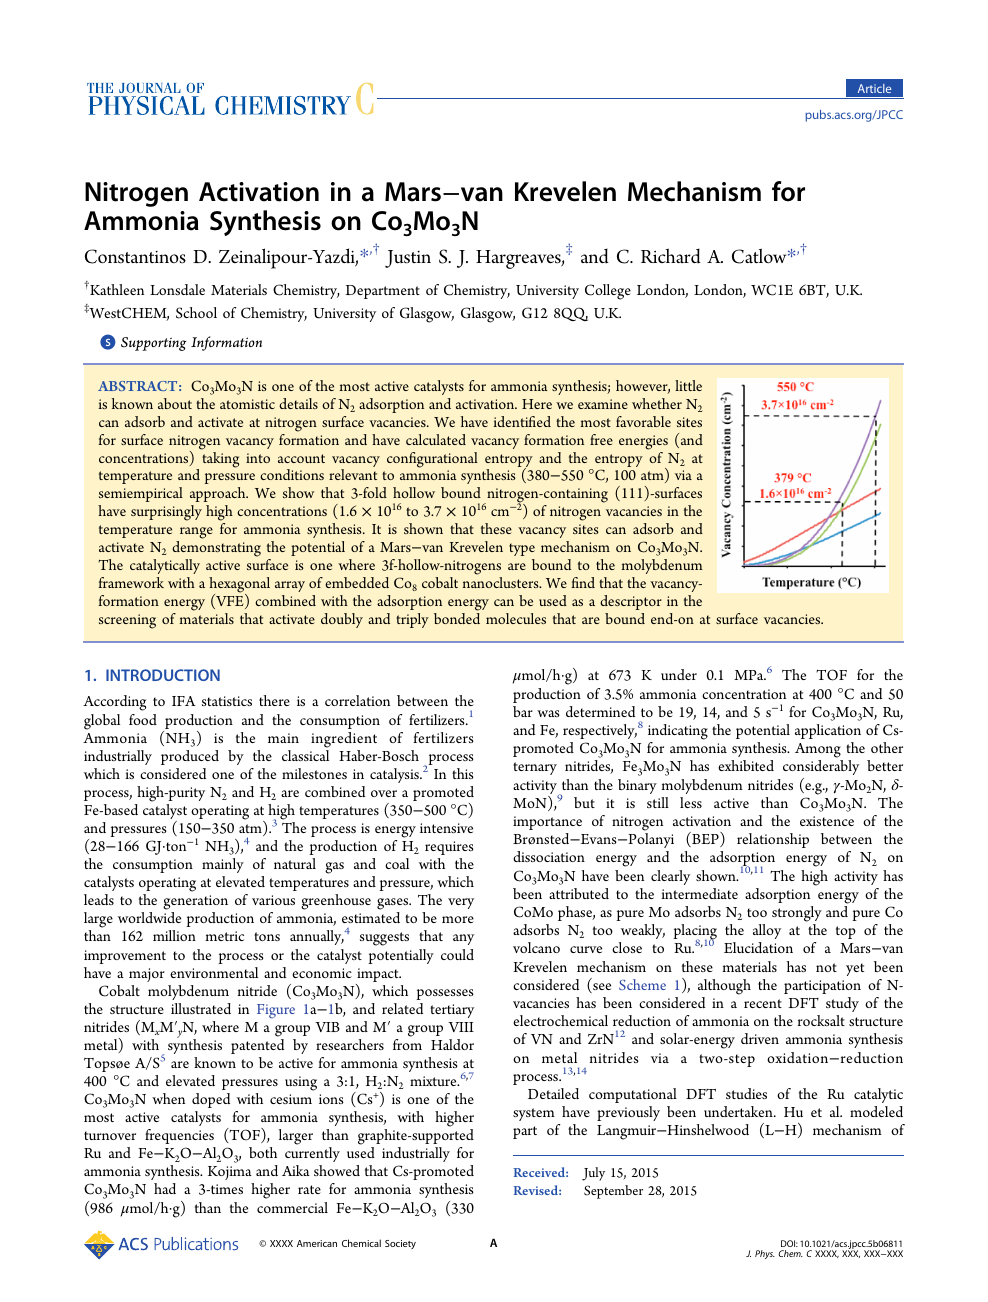 Nitrogen Activation In A Mars Van Krevelen Mechanism For Ammonia Synthesis On Co 3 Mo 3 N Topic Of Research Paper In Nano Technology Download Scholarly Article Pdf And Read For Free On